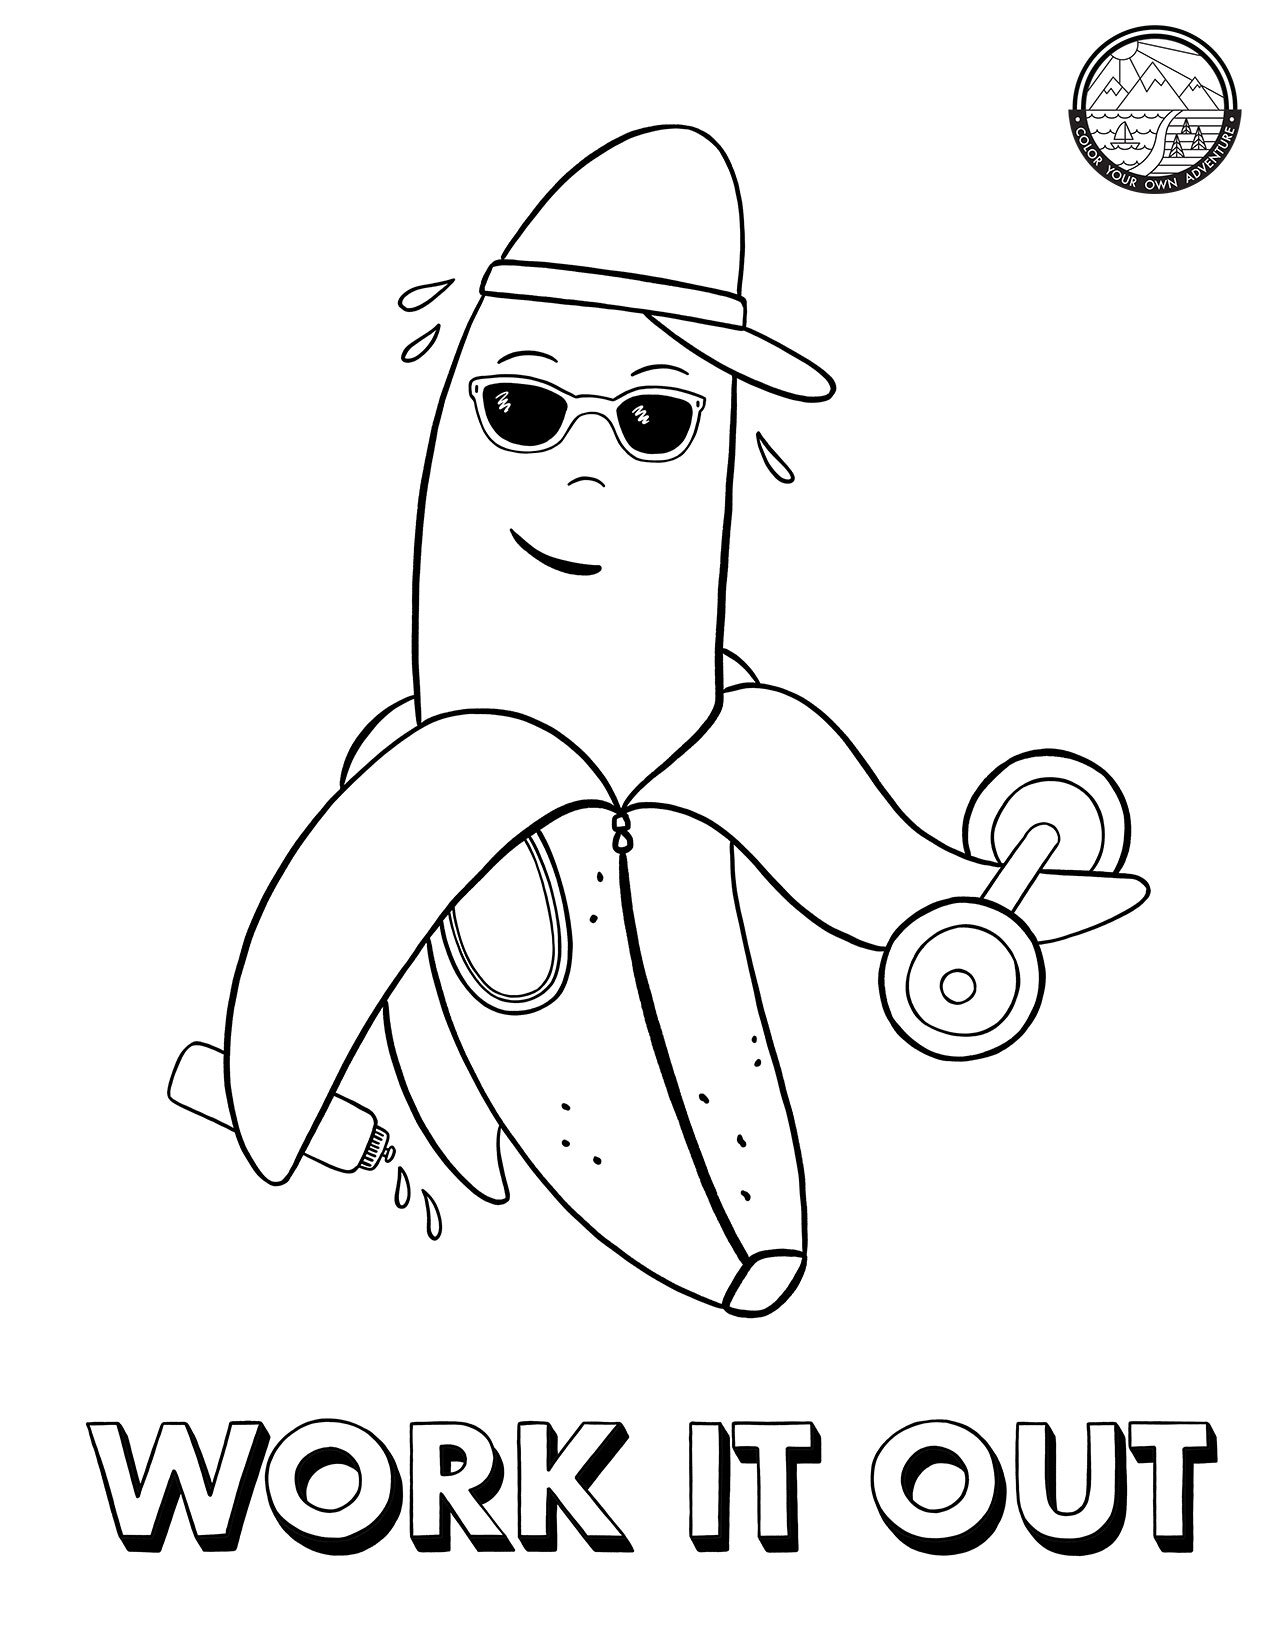 Work It Out Coloring Page